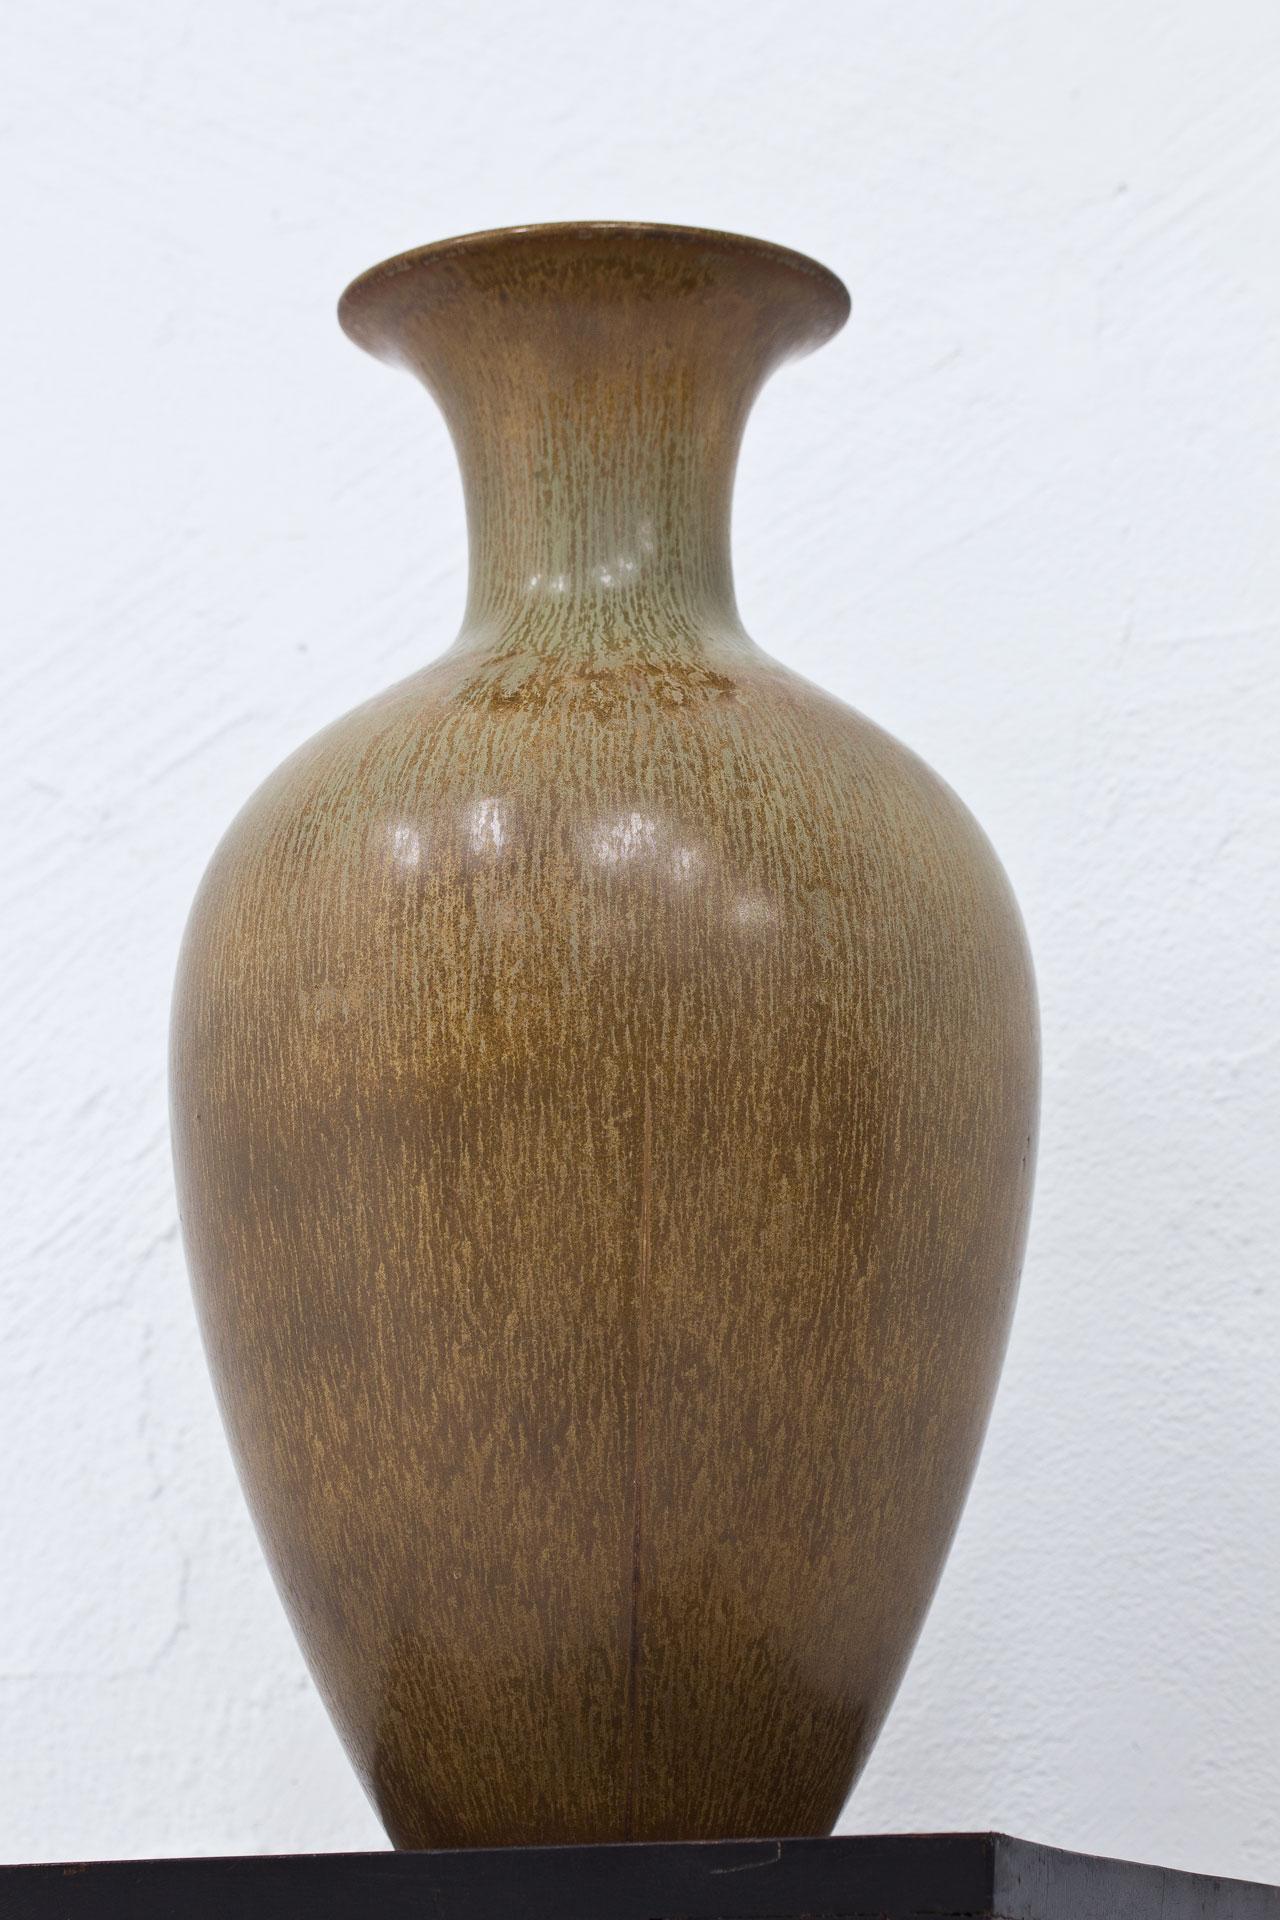 Stoneware floor vase designed by Gunnar Nylund. 
Manufactured by Rörstrand in Sweden during the 1950s.
Hare fur glaze in light brown and green.